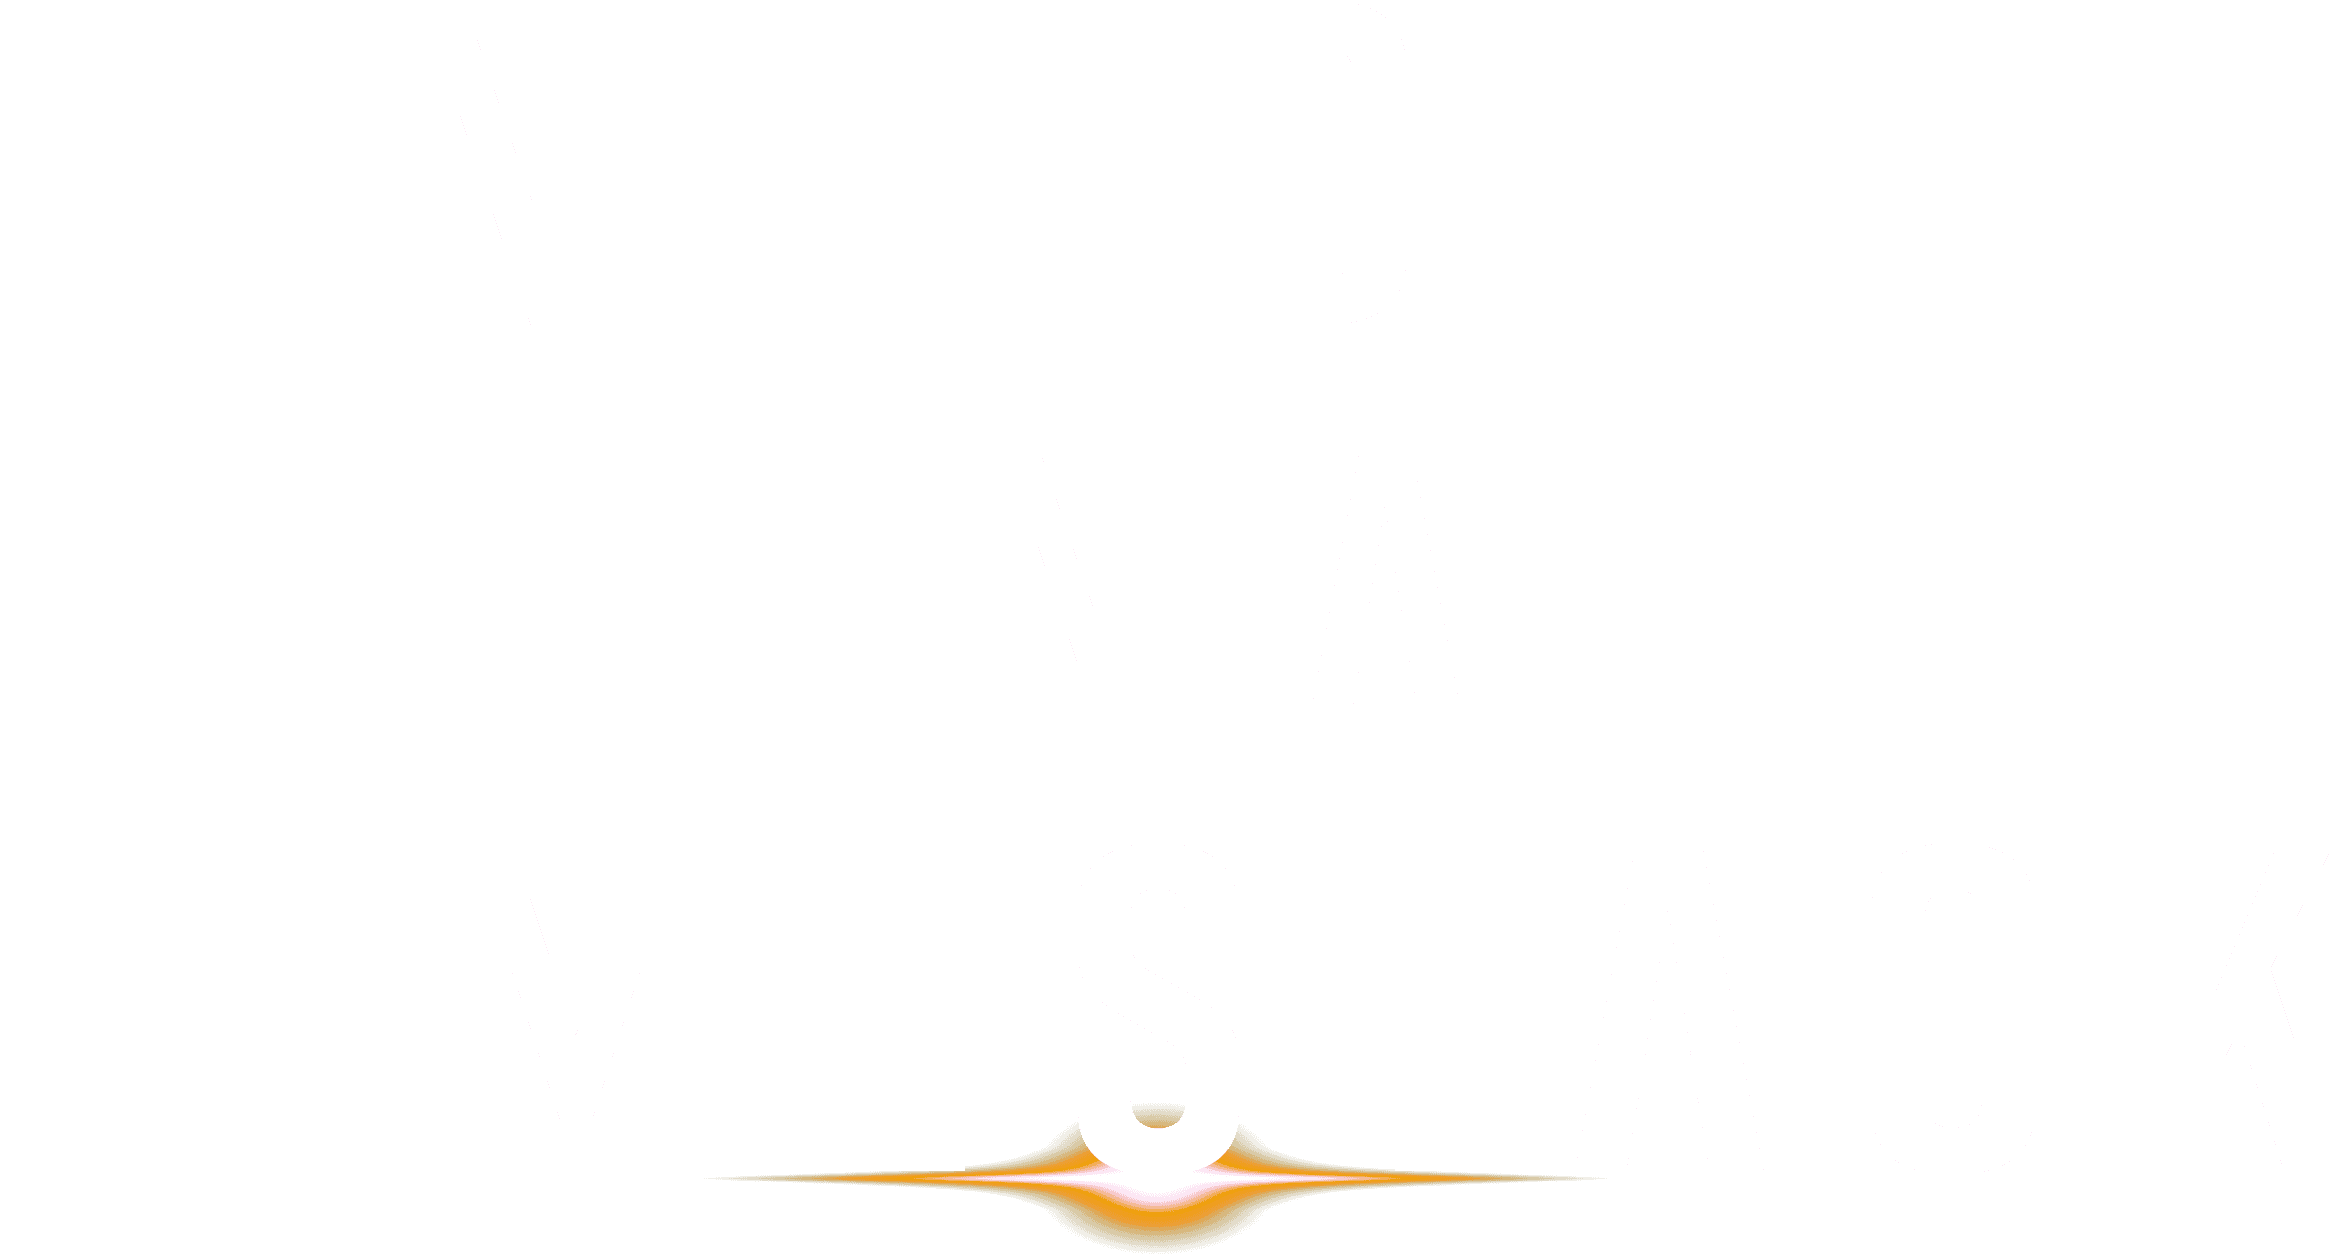 Needle in a Timestack logo